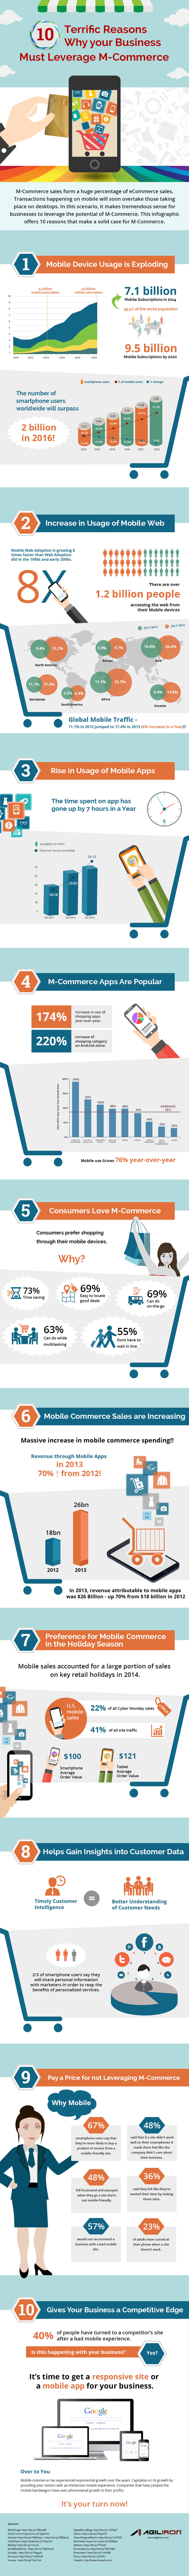 Ten Terrific Reasons Why your Business Must Leverage M-Commerce